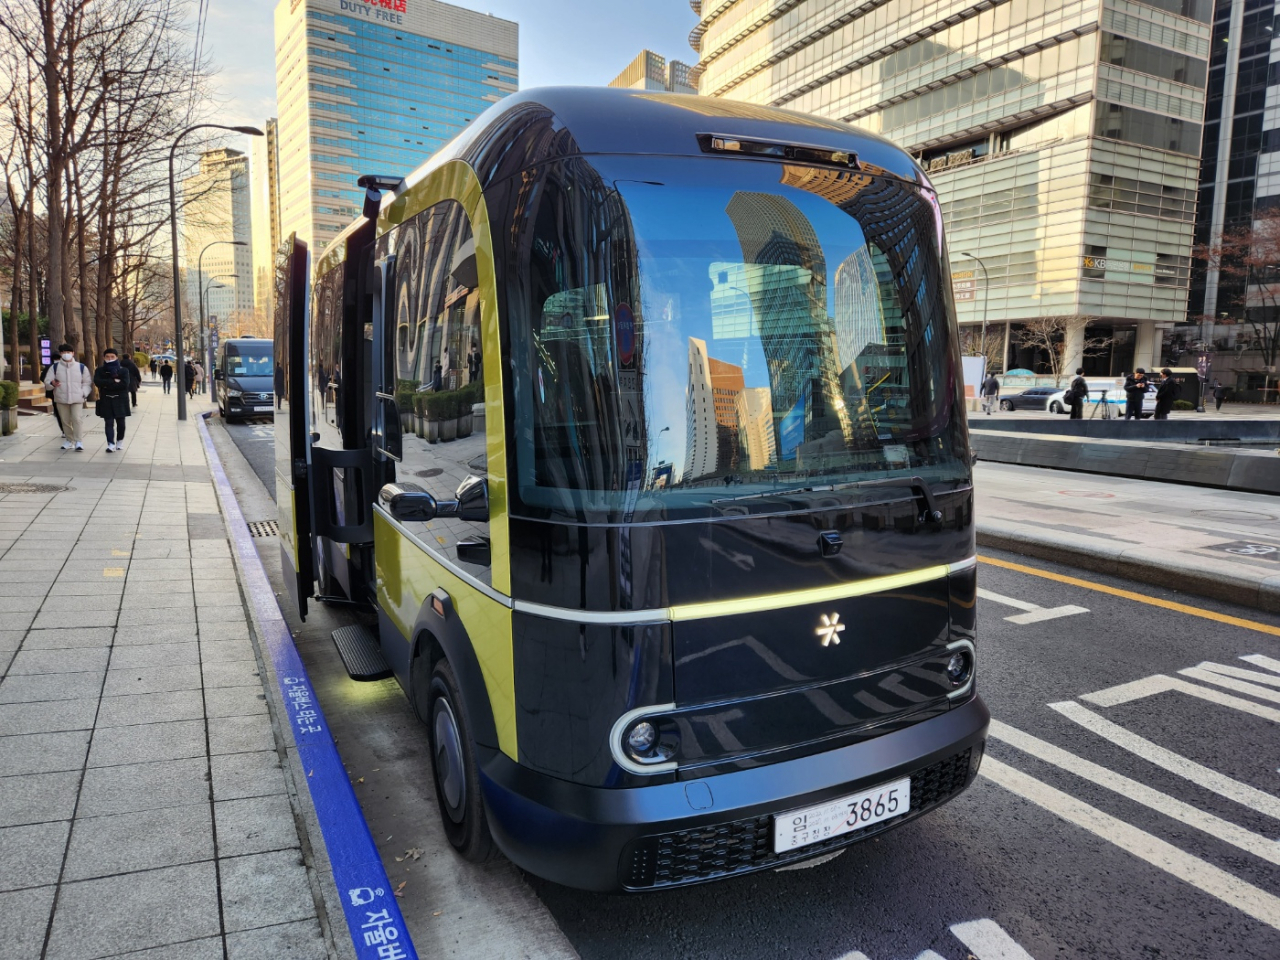 A self-driving bus stops near Cheonggye Stream in Seoul’s central district of Jongno. (Choi Jae-hee / The Korea Herald)